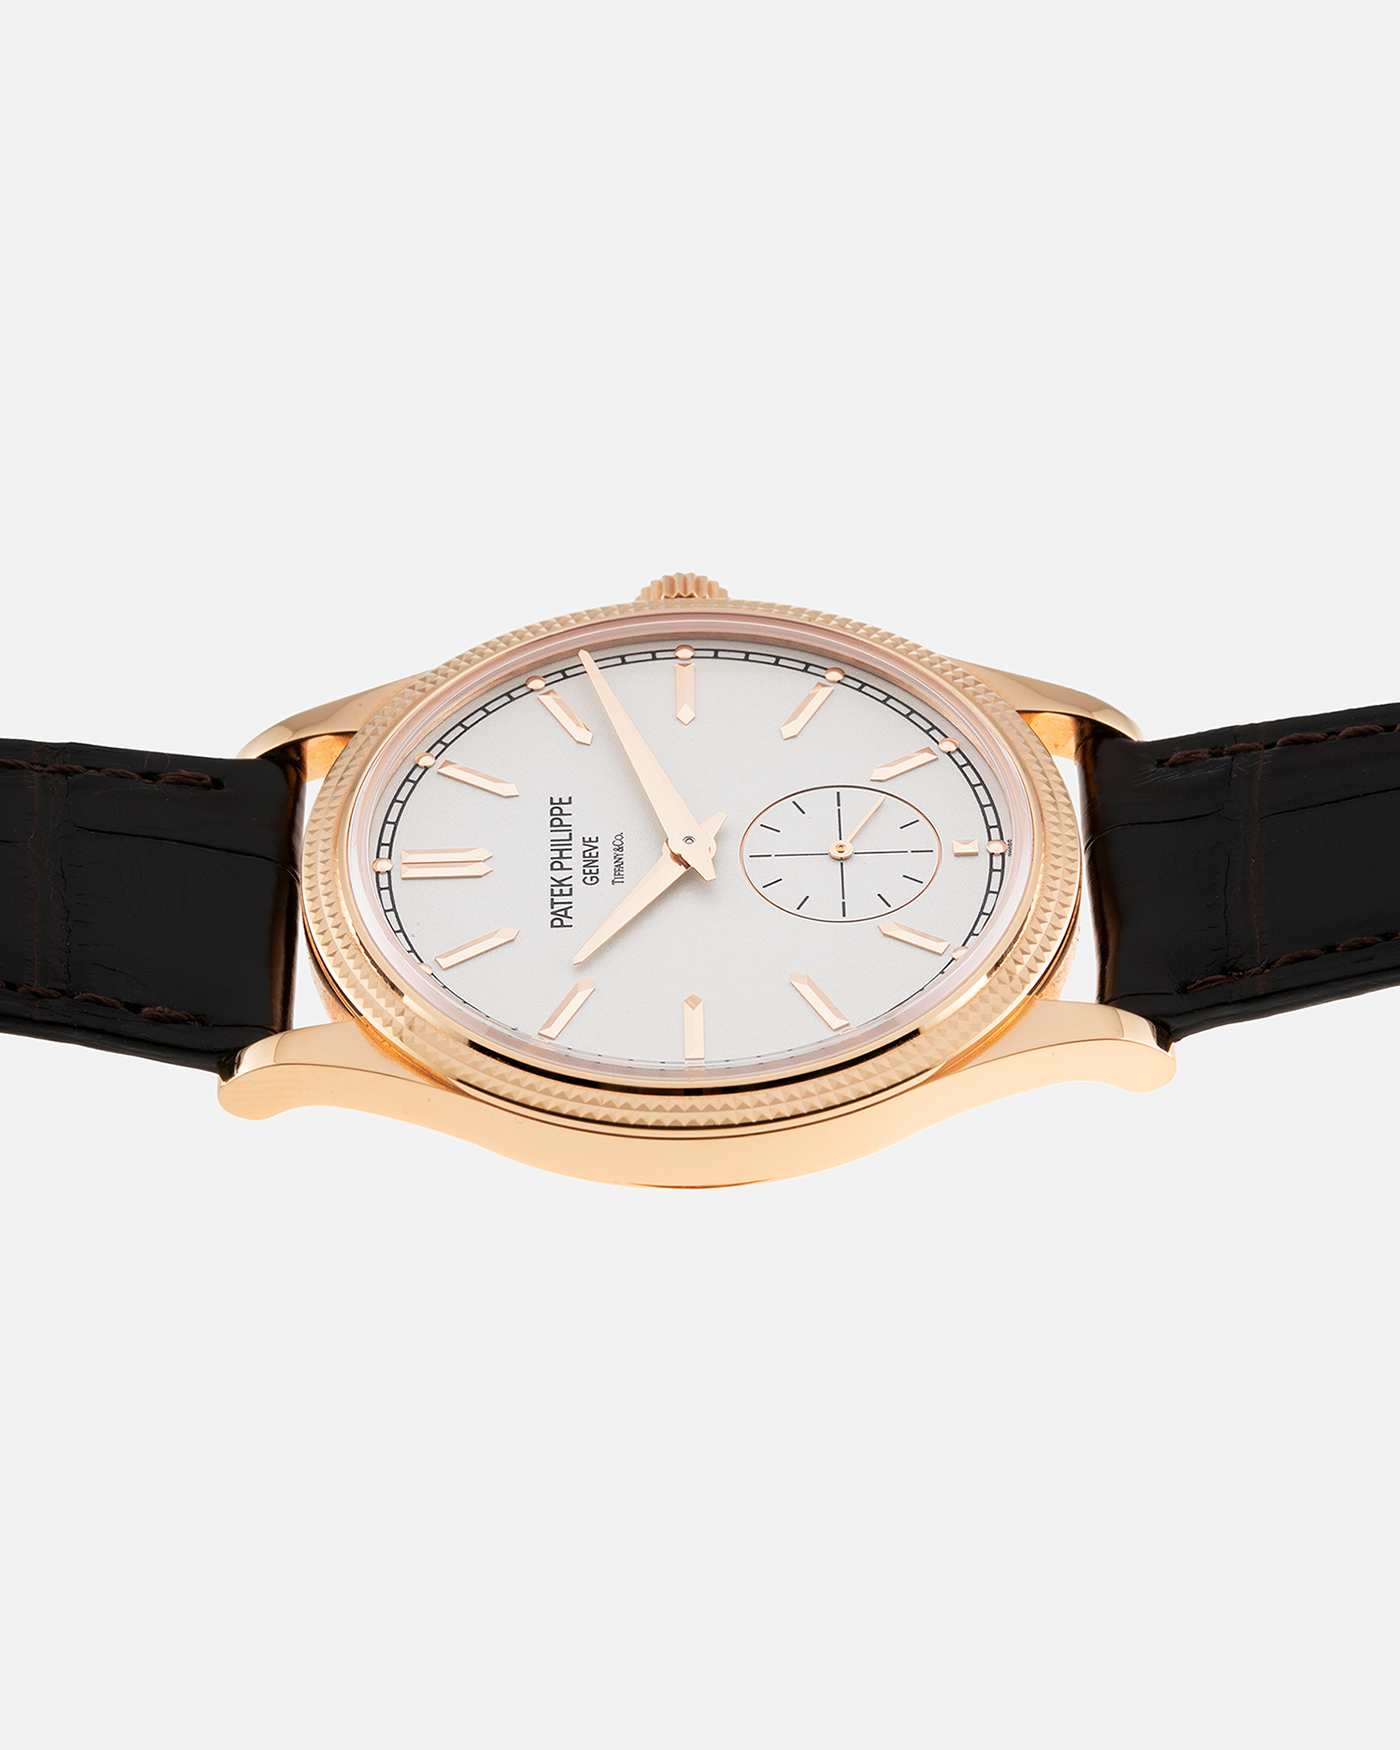 Brand: Patek Philippe Year: 2022 Model: Calatrava Reference: 6119R Material: 18-carat Rose Gold Movement: Patek Philippe Cal. 30-255, Manual-Wind Case Diameter: 39mm x 8.08mm Strap: Patek Philippe Chocolate Brown Alligator Leather with Signed 18-carat Rose Gold Tang Buckle